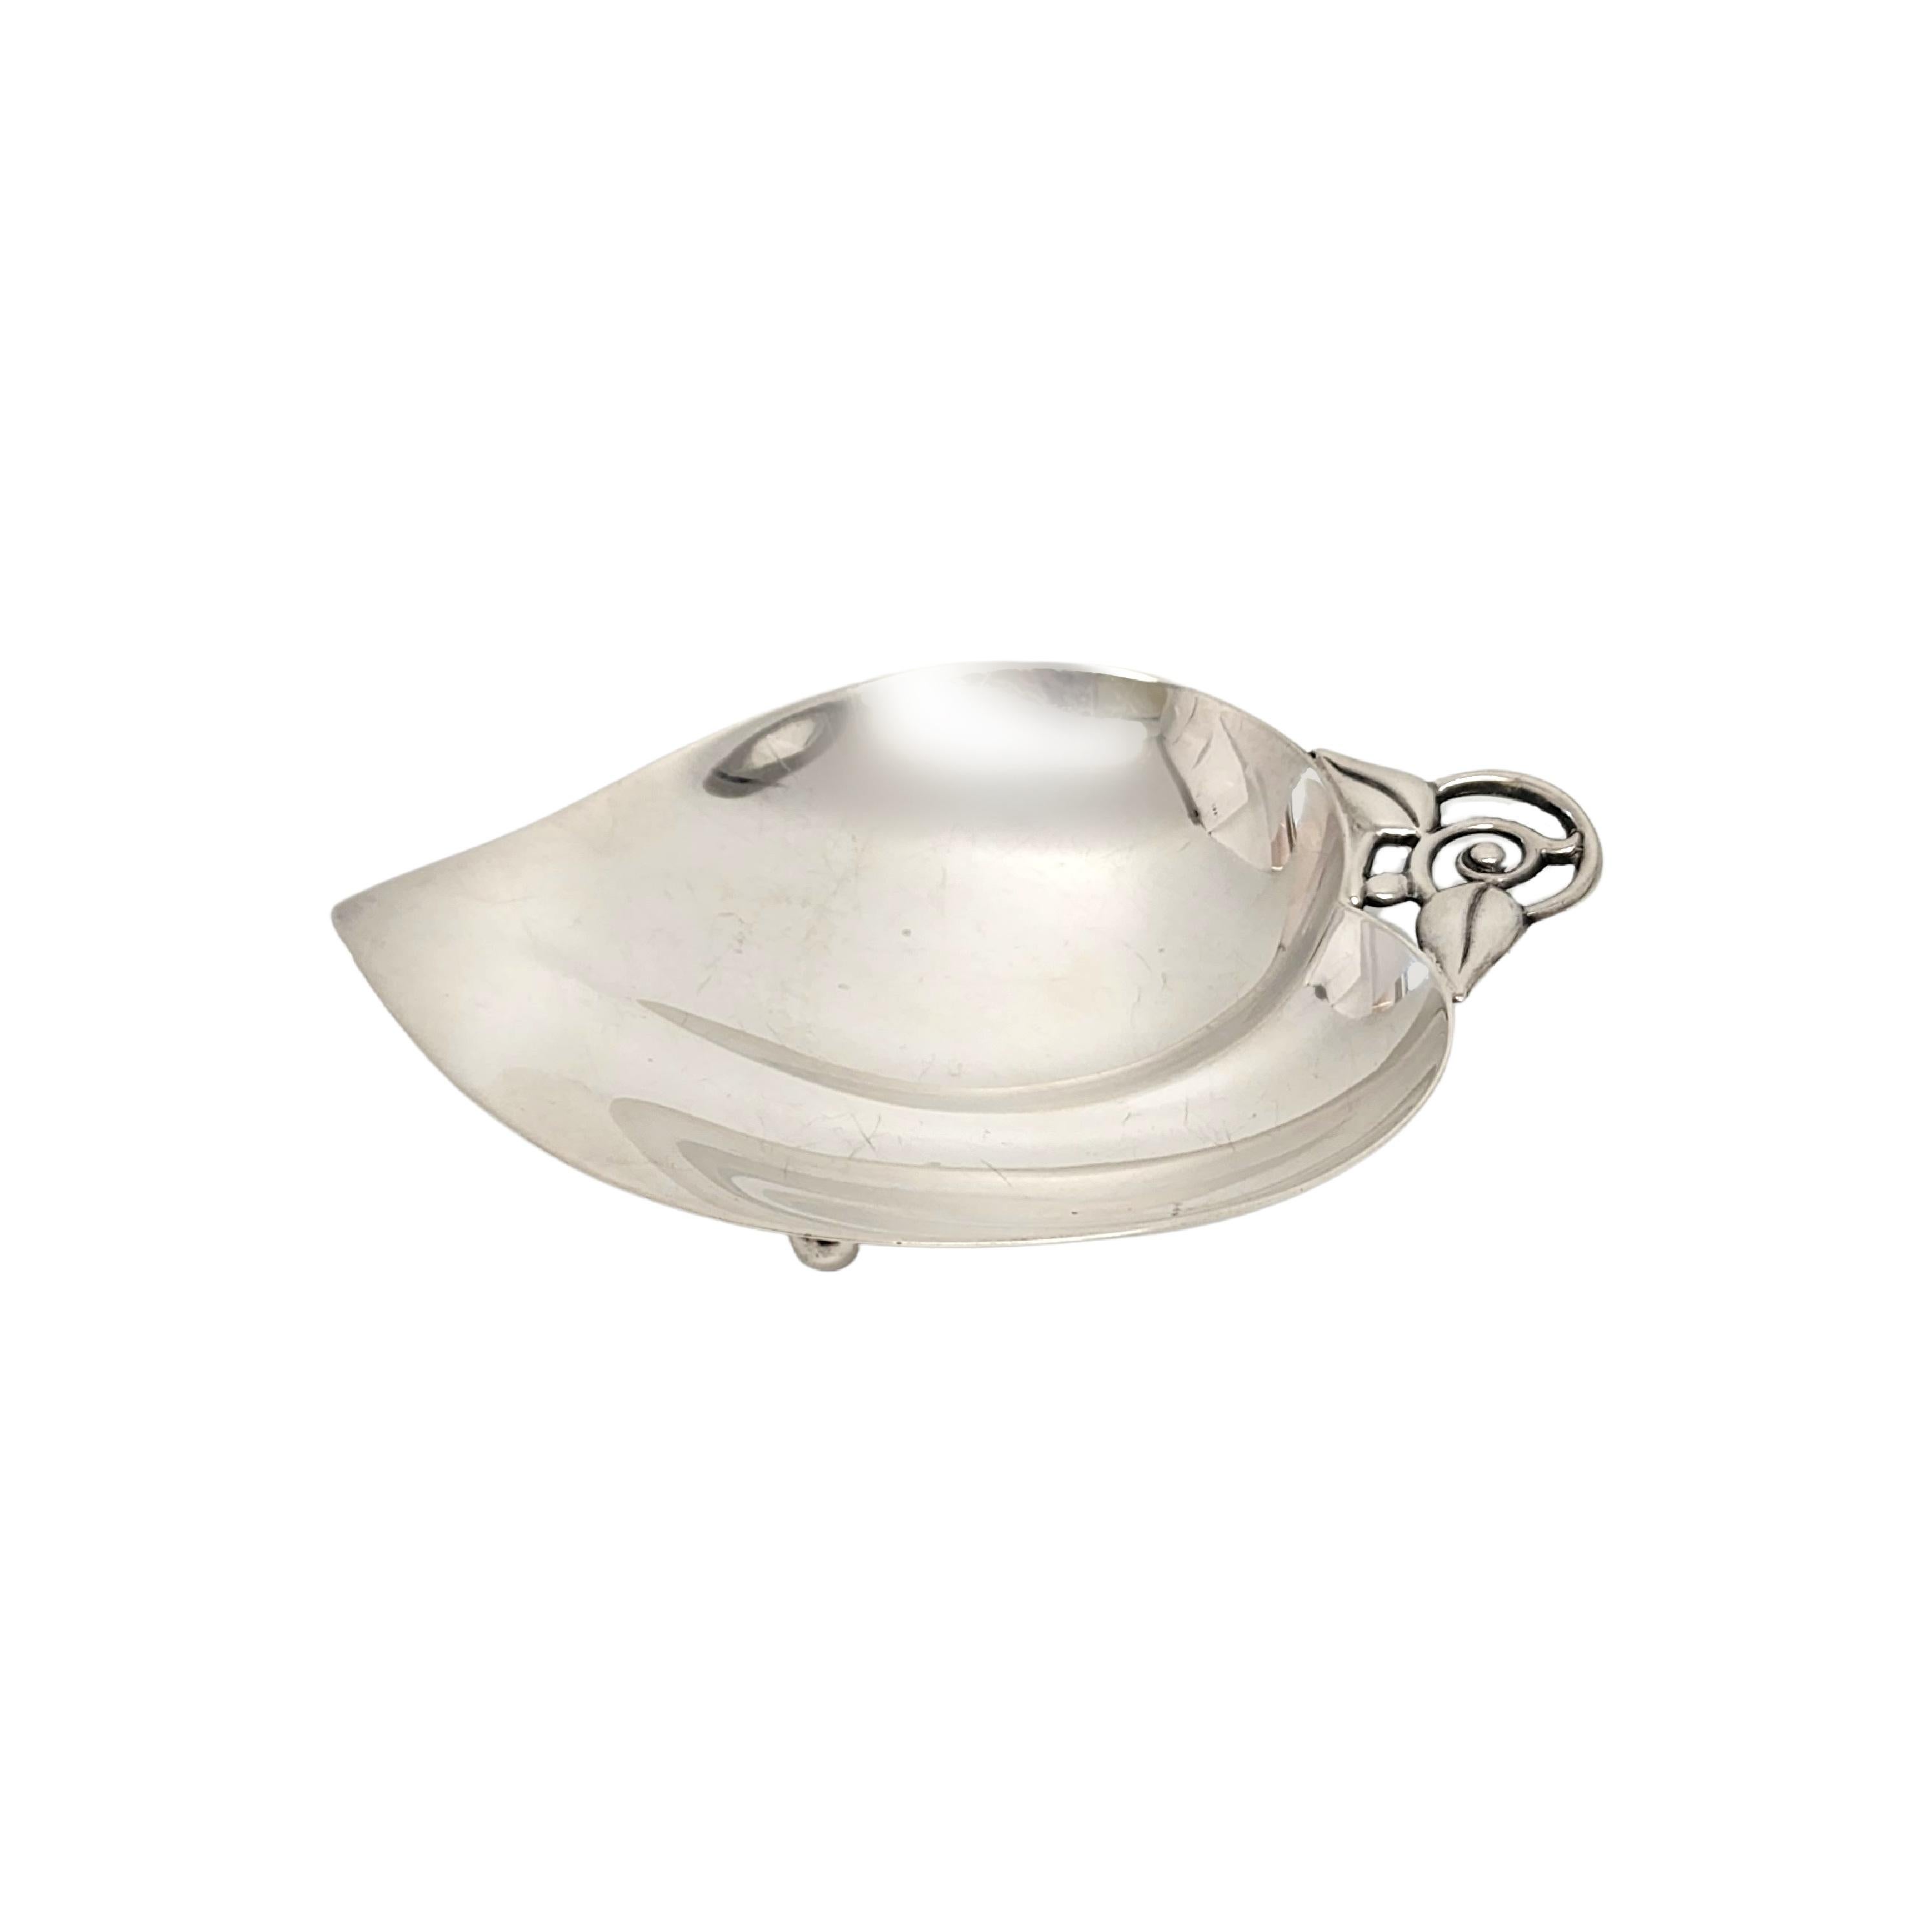 Tiffany & Co sterling silver small apple/heart shaped dish.

A beautiful sterling silver apple or heart shaped dish featuring an open work leaf handle and 2 ball feet underneath. The M hallmark dates this piece to manufacture under the directorship